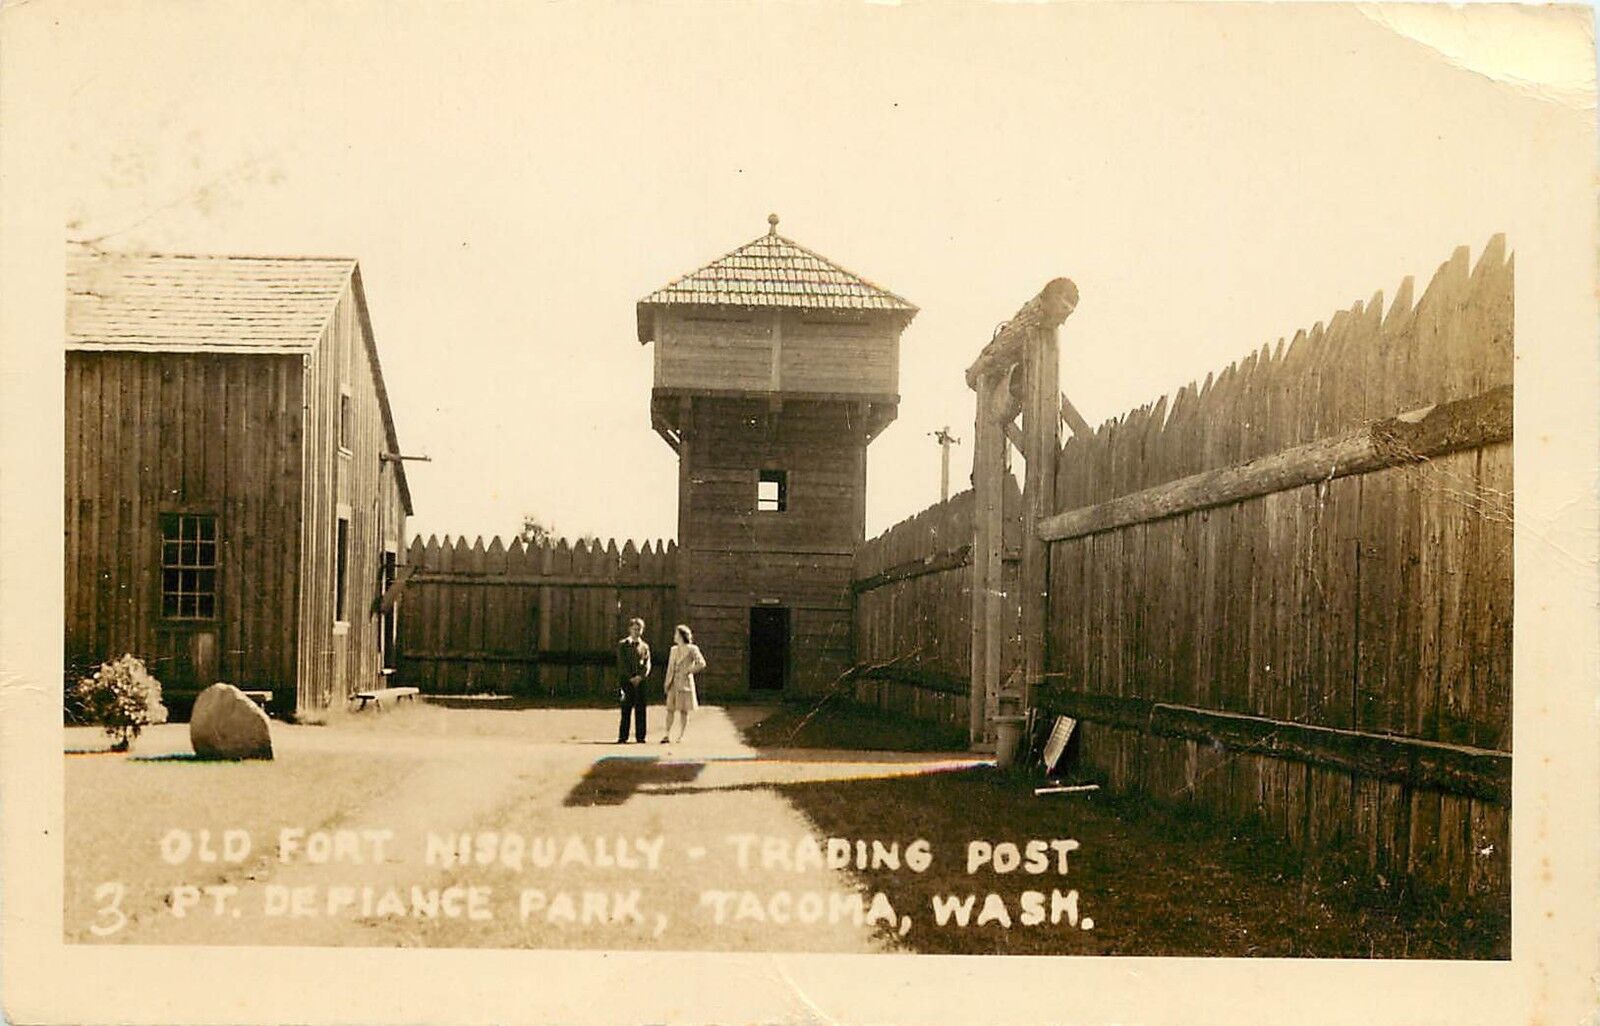 c1940 RPPC Postcard Old Fort Nisqually Trading Post Ft. Defiance Park Tacoma WA